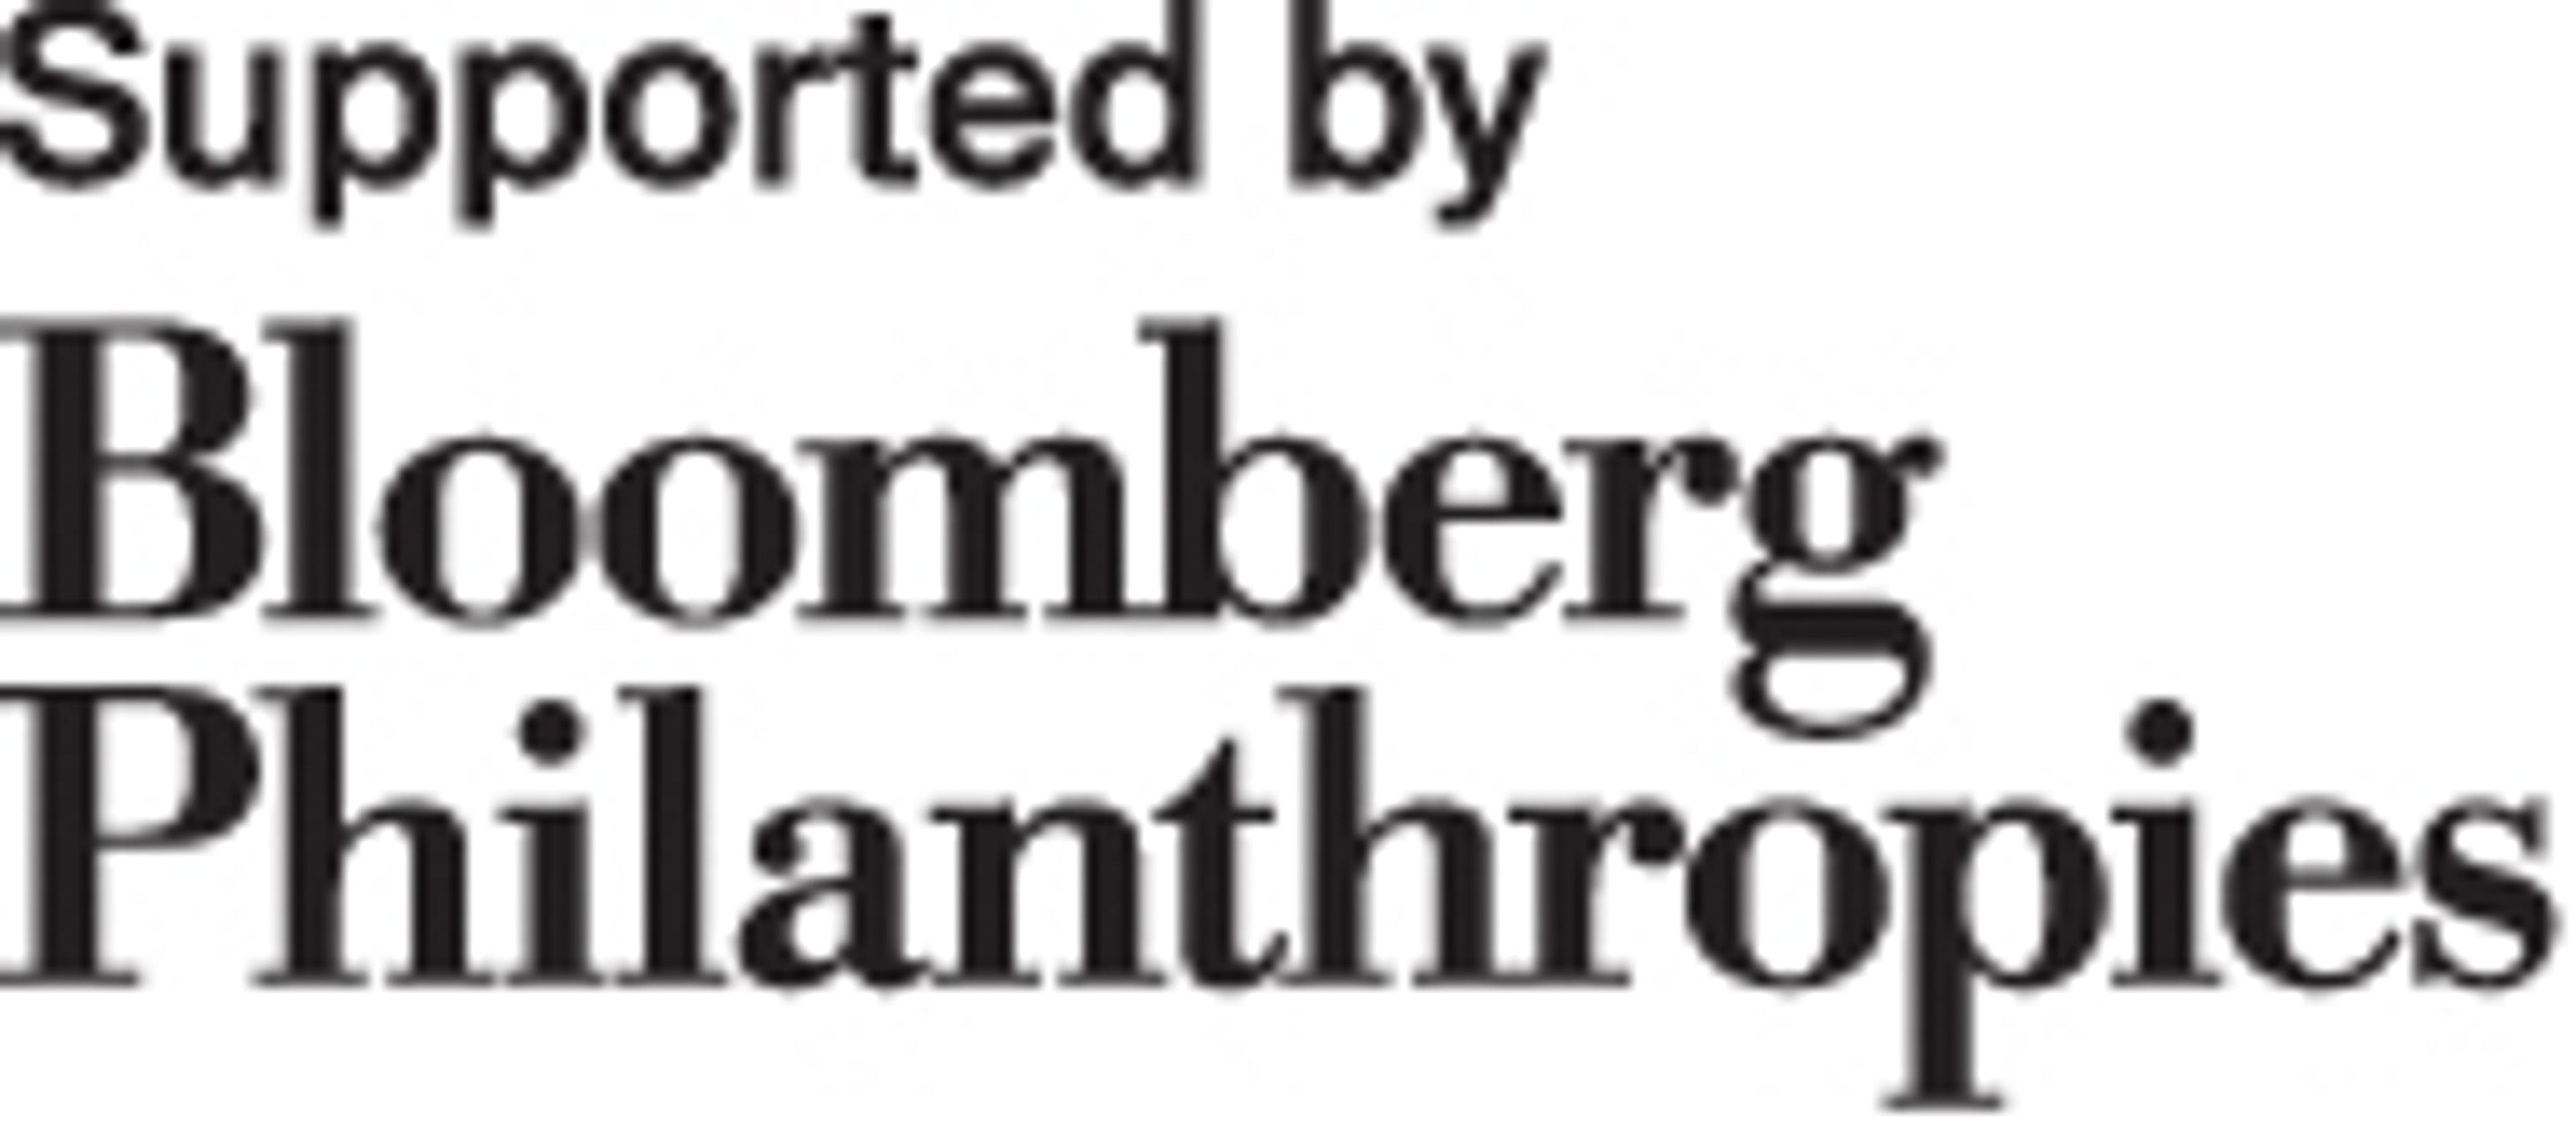 Supported by Bloomberg Philanthropies logo